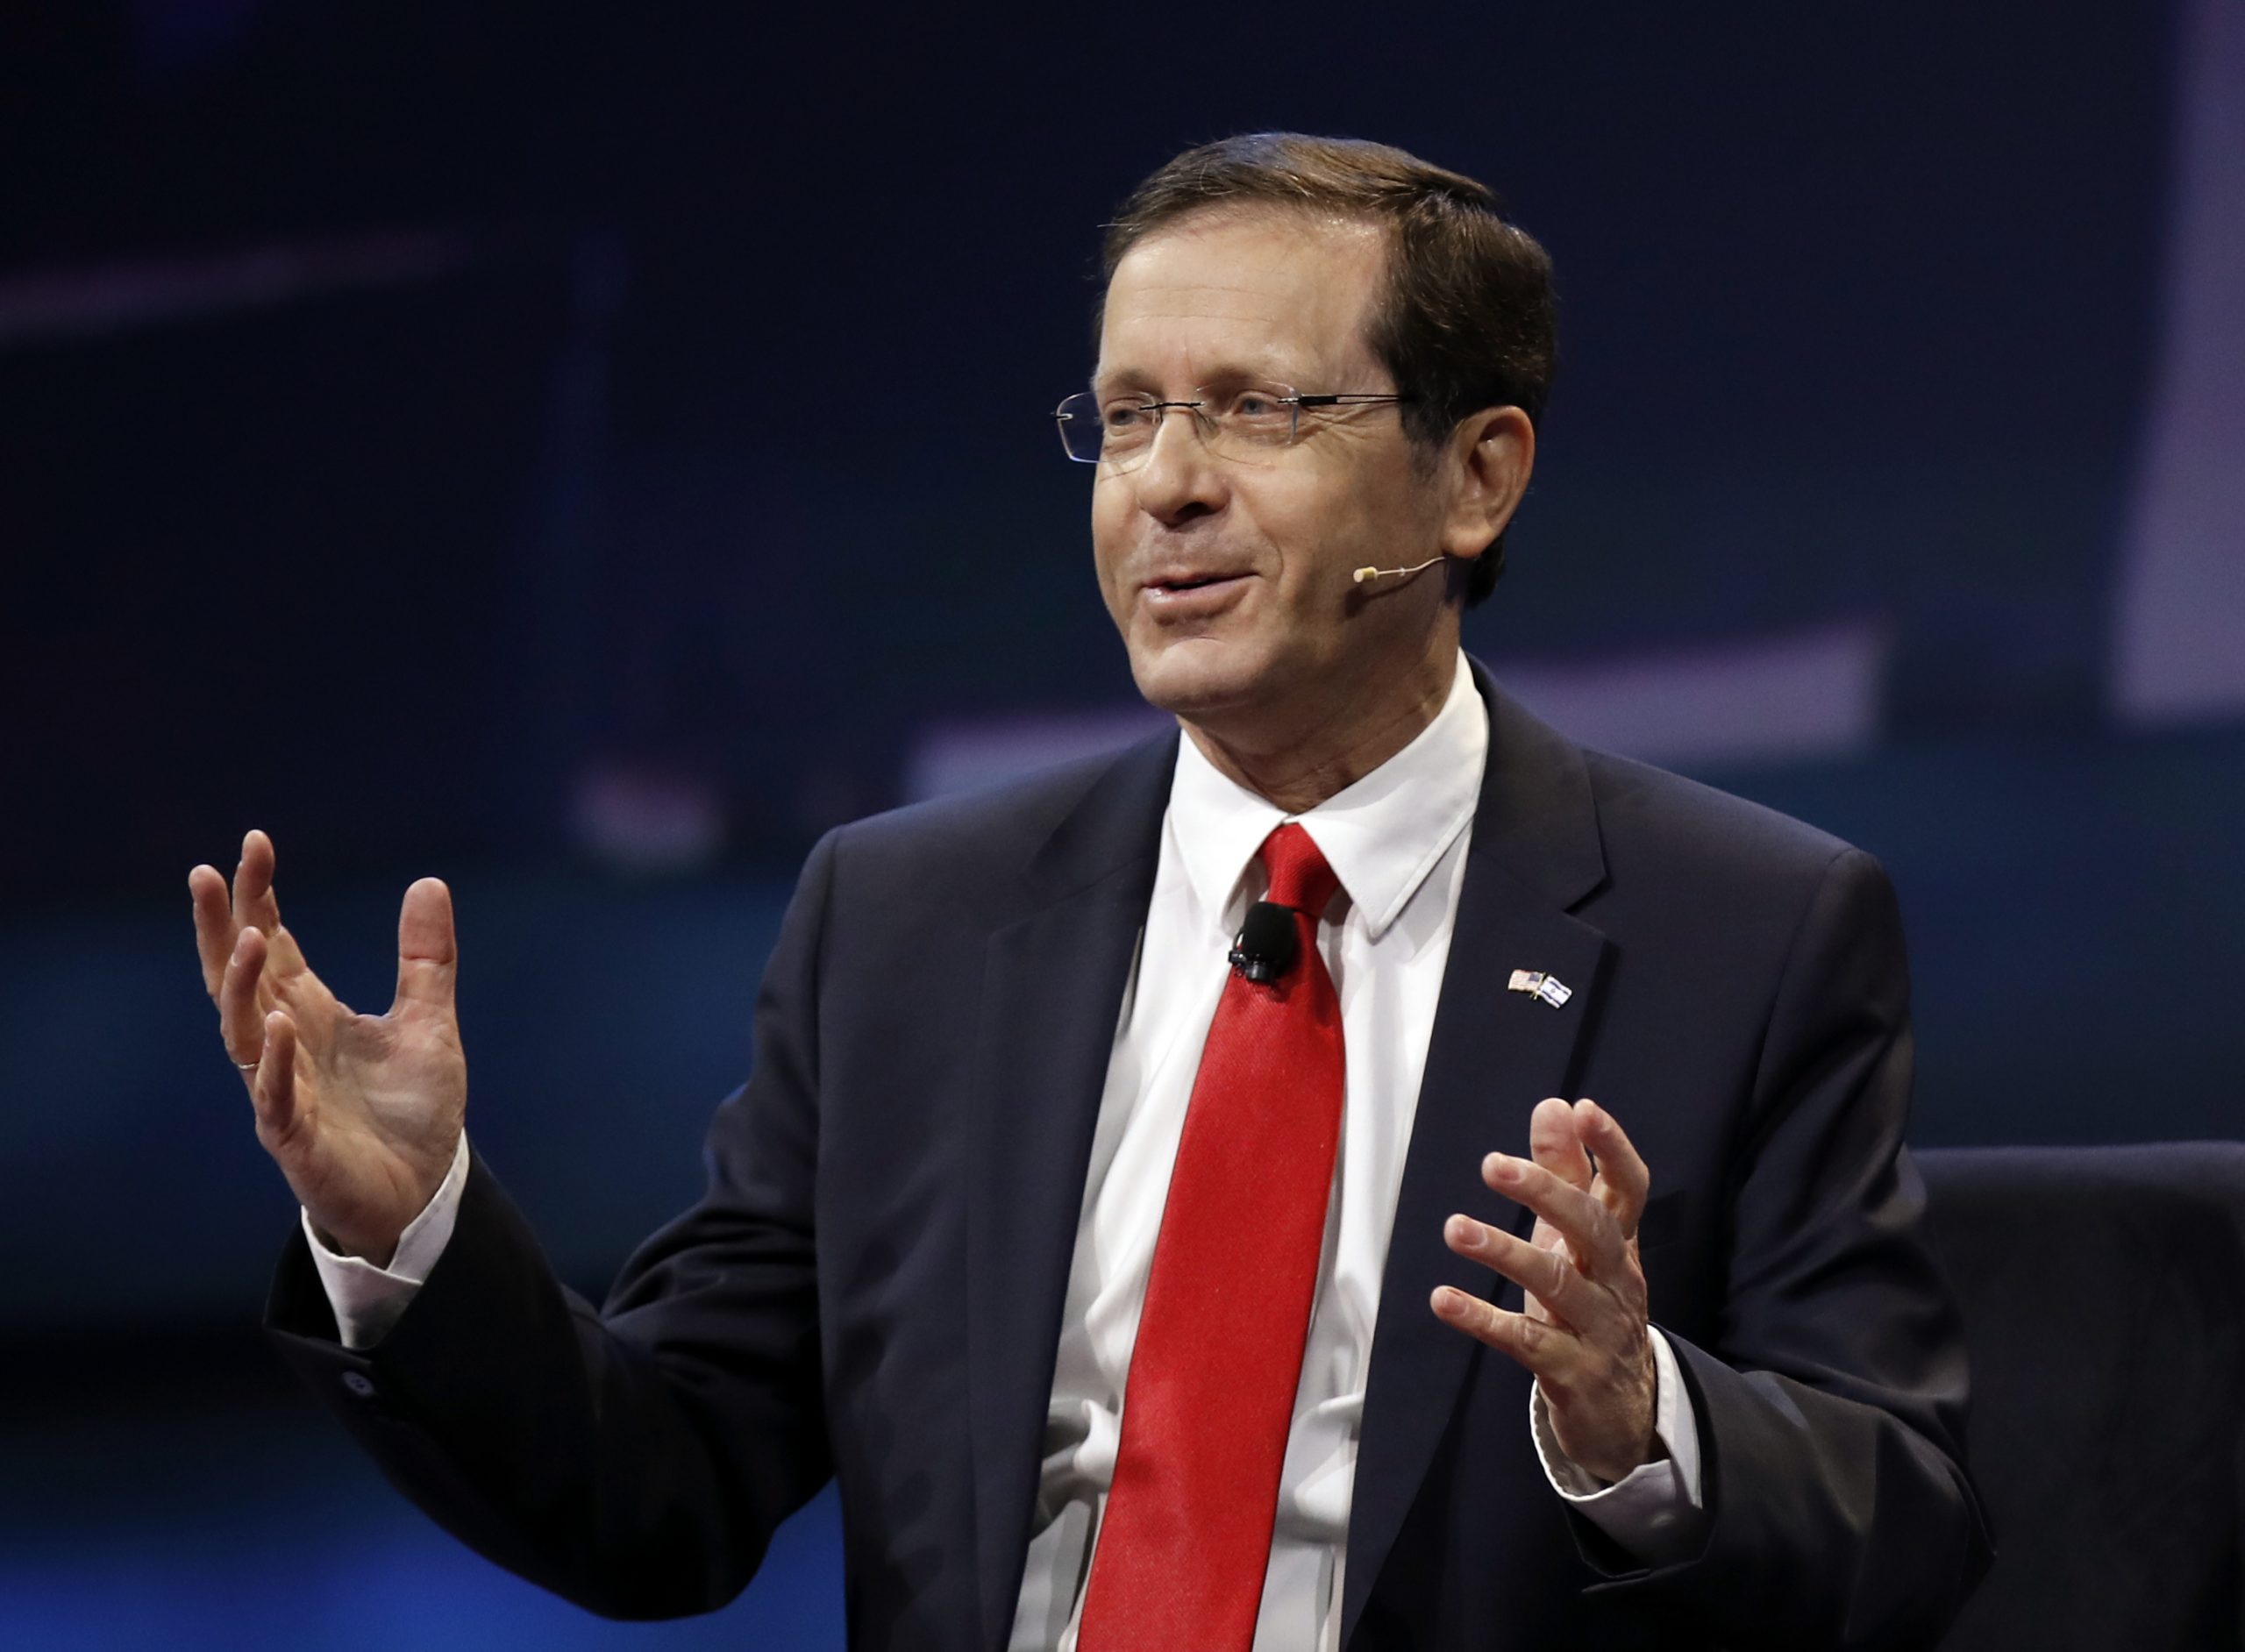 FILE - In this Monday, March 27, 2017, file photo, Isaac Herzog speaks at the AIPAC Policy Conference in Washington. The Israeli parliament on Wednesday, June 2, 2021, is set to choose the country's next president, a largely figurehead position that is meant to serve as the nation's moral compass and promote unity. Two candidates are running — Herzog, a veteran politician and scion of a prominent Israeli family, and Miriam Peretz, an educator who is seen as a down-to-earth outsider. (AP Photo/Manuel Balce Ceneta, File)